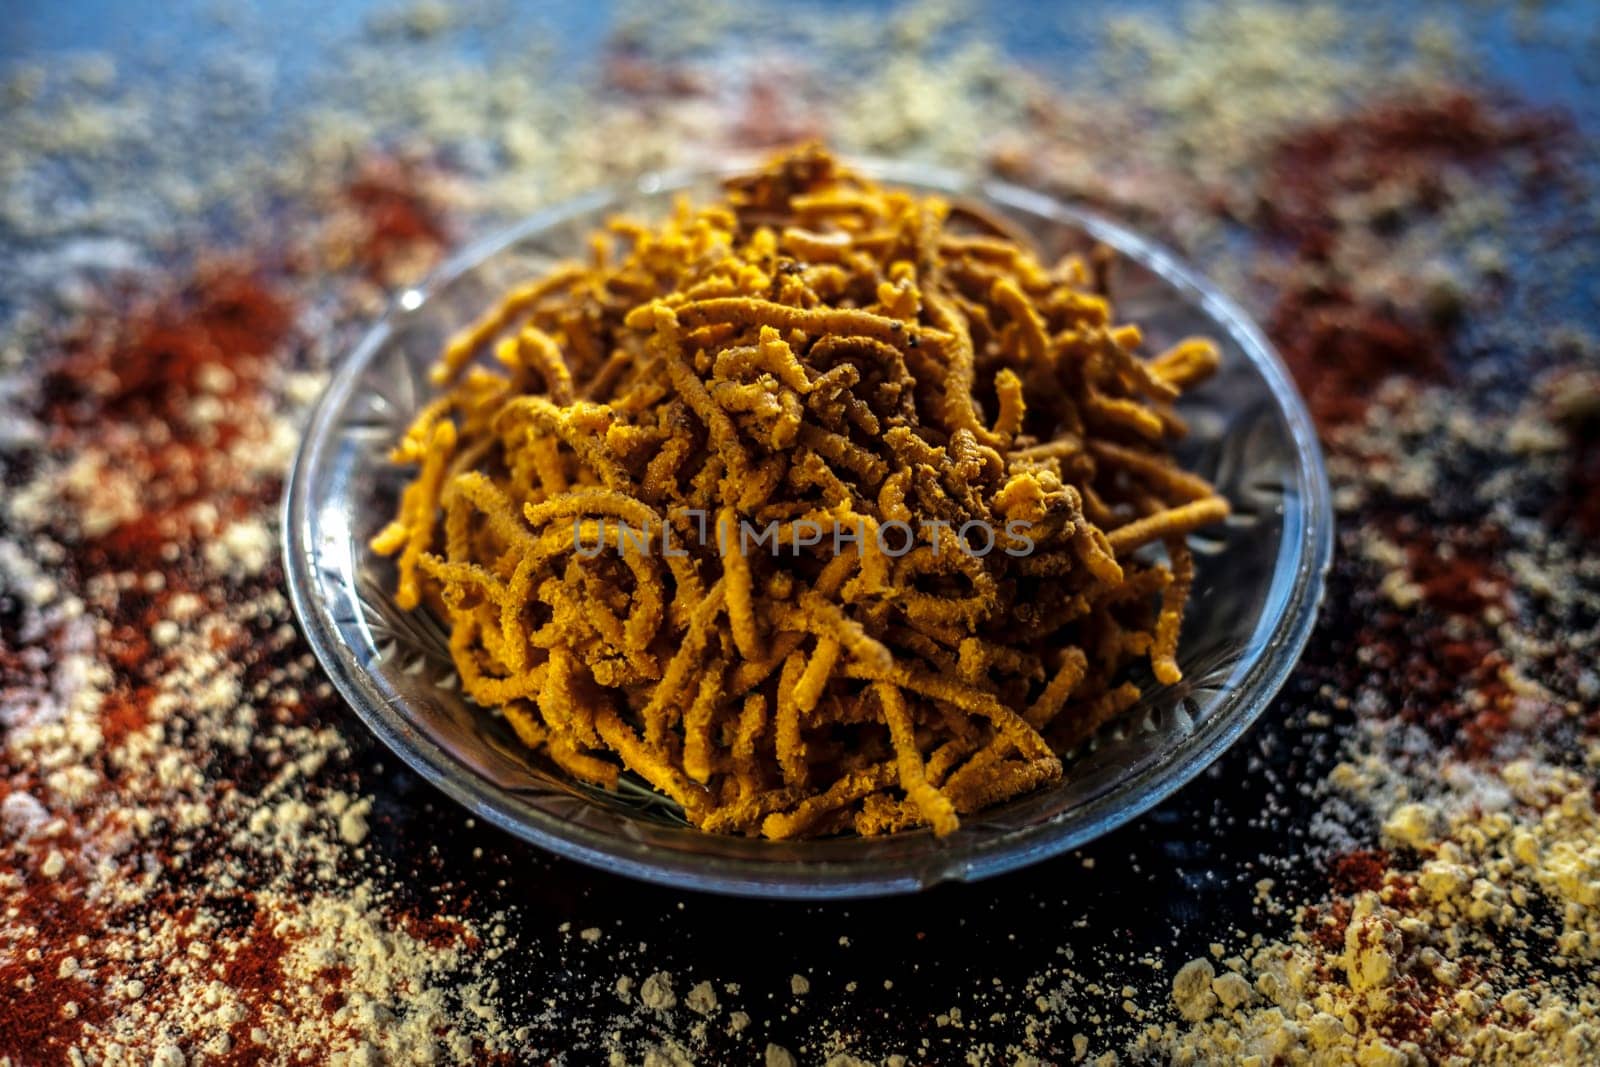 Diwali and Shravan Som special Teekha Gathiya in a glass plate along with some spread chickpea flour, red chili powder, and other ingredients that are needed to make the snack on a black surface.